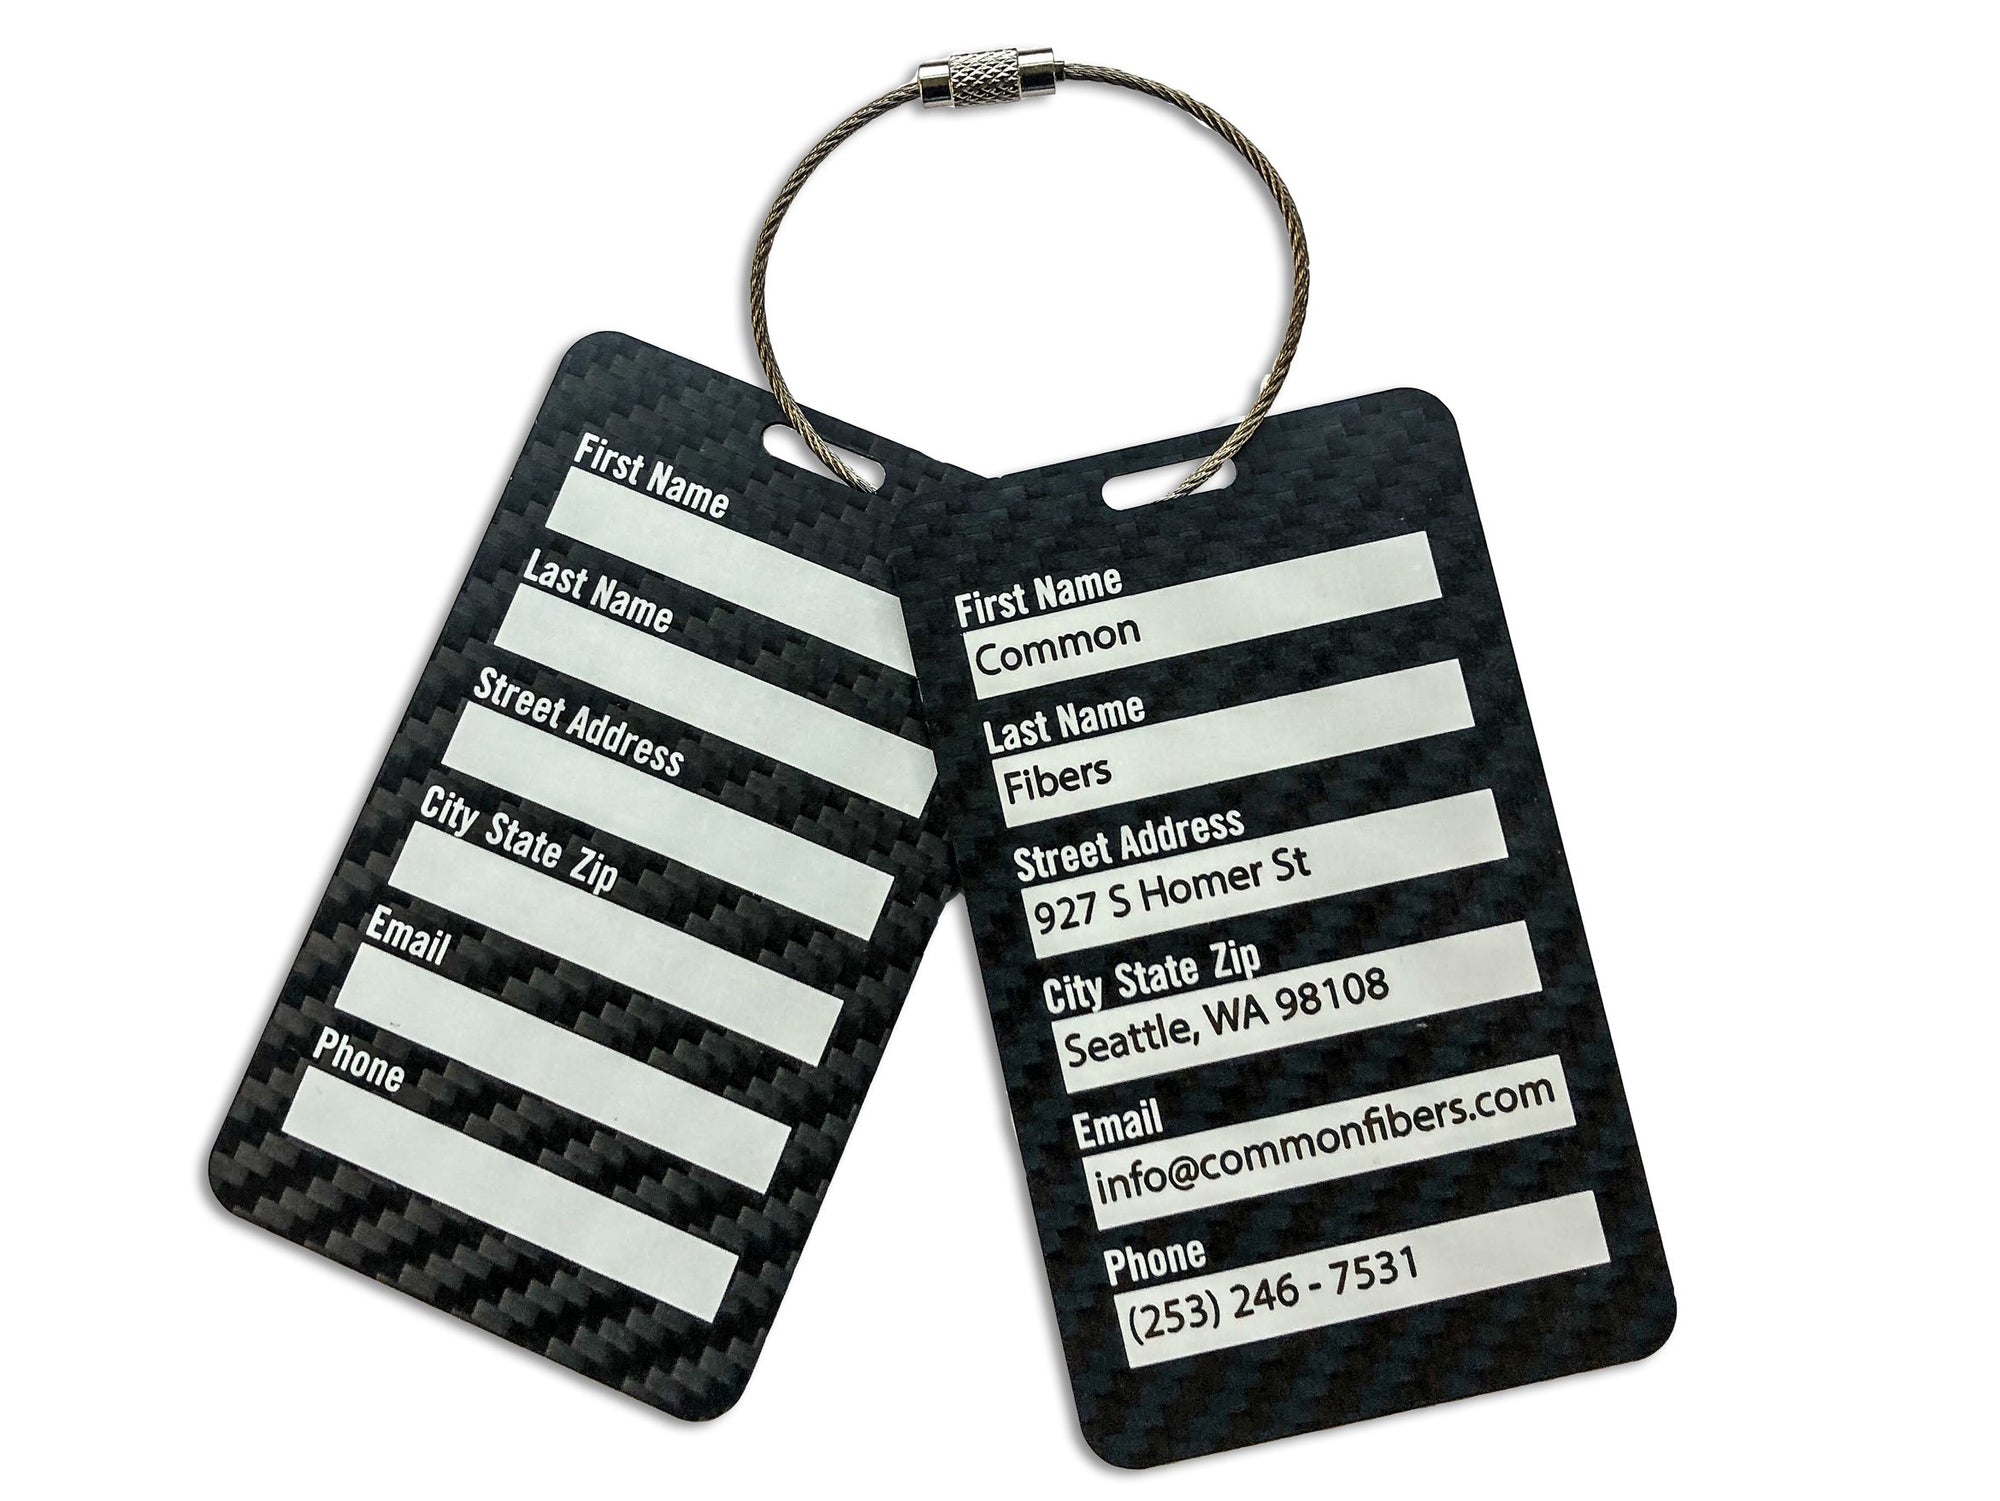 Multiple high end carbon fiber luggage tags with the availability to put contact information